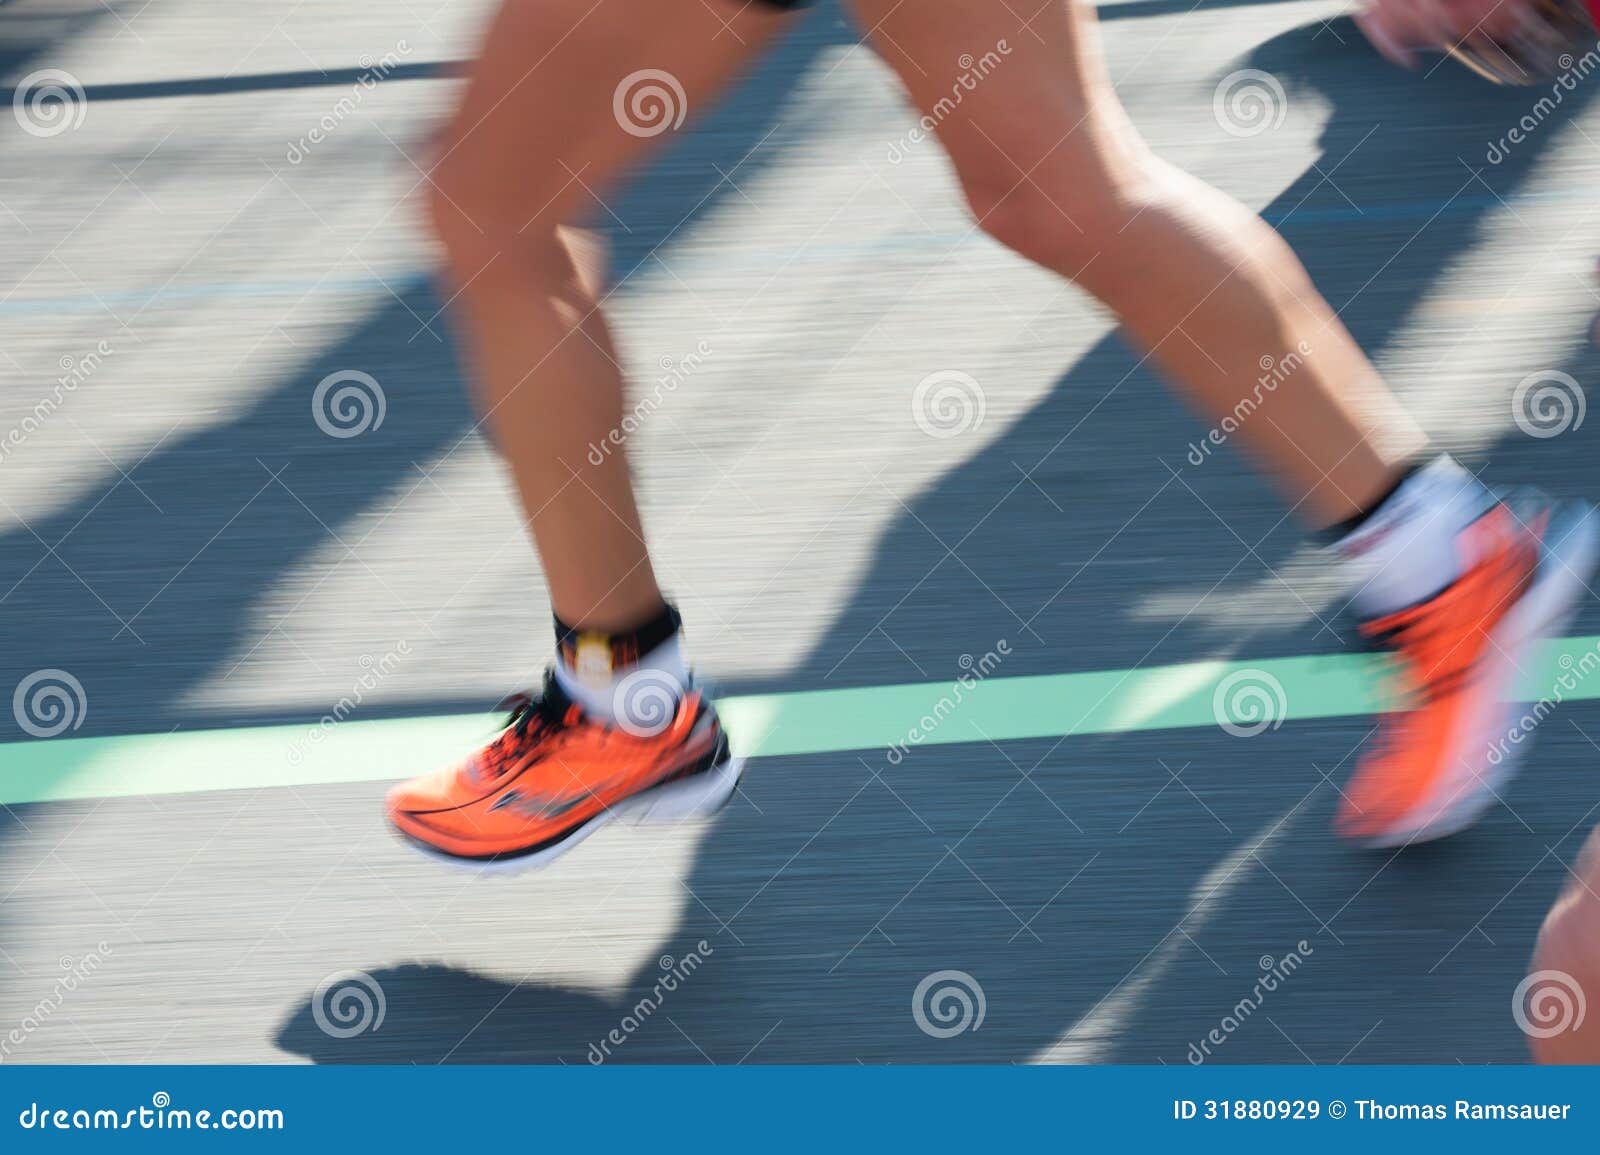 Running stock image. Image of power, street, healthy - 31880929